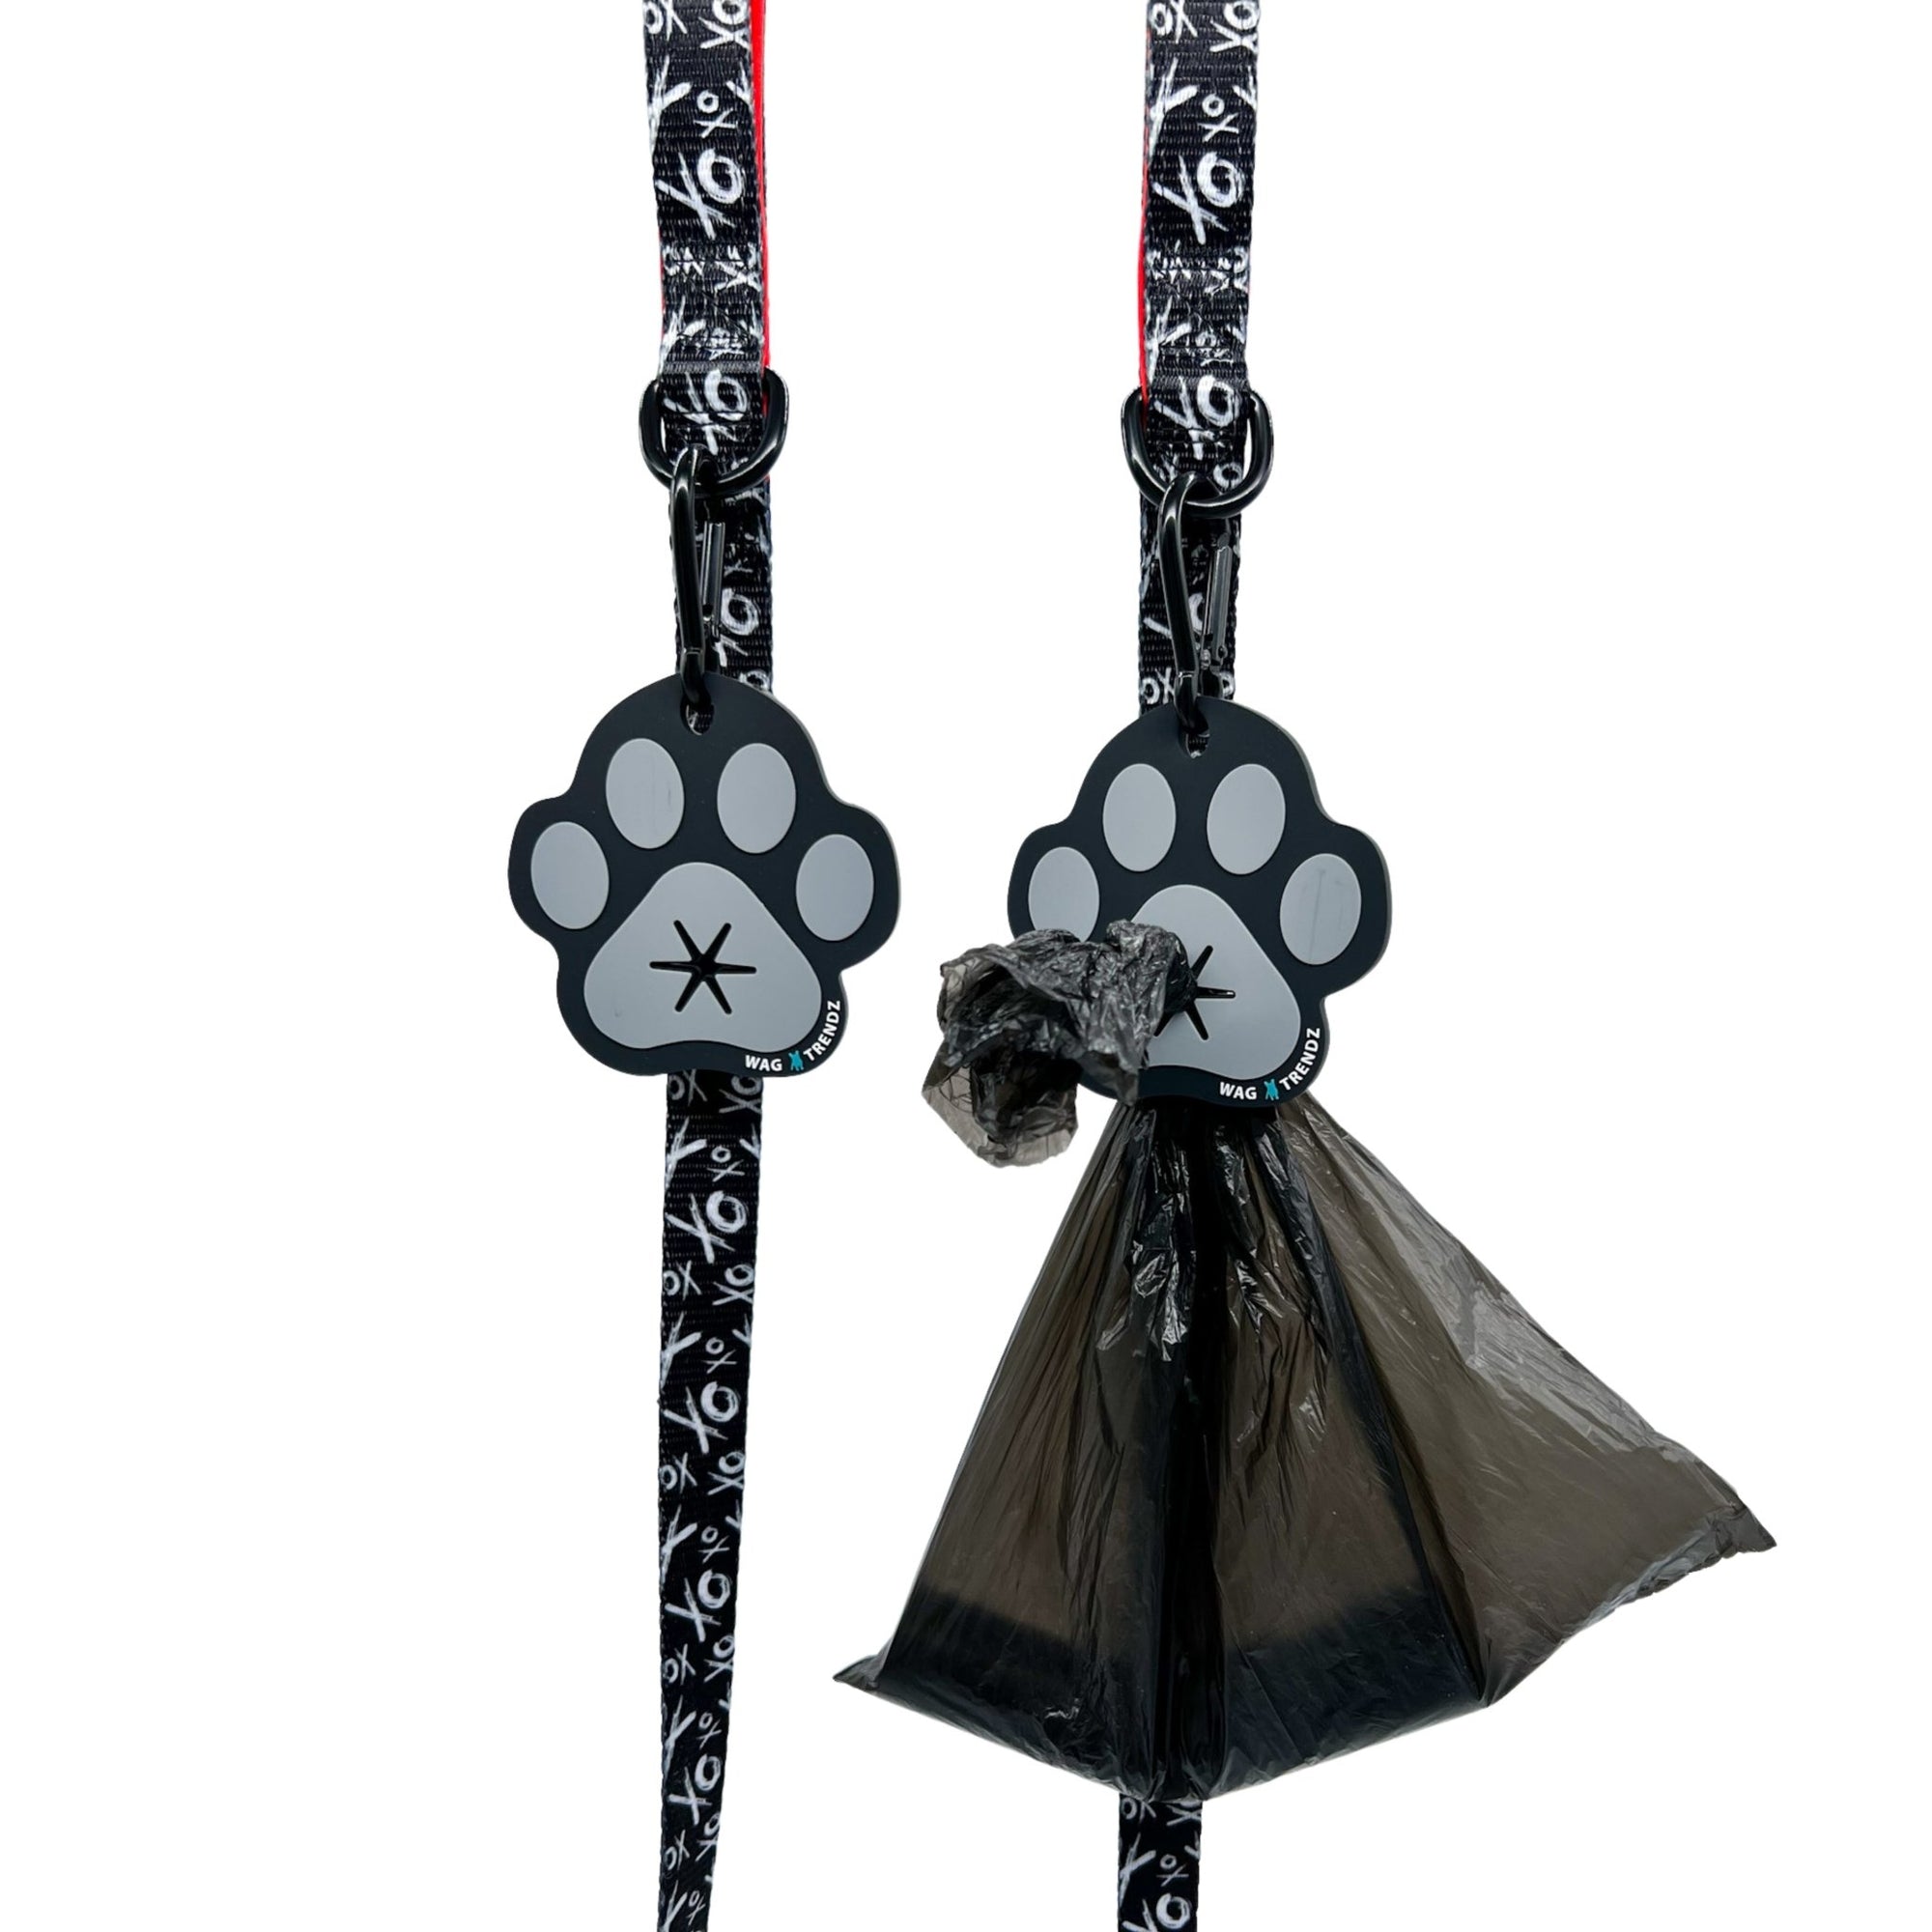 Poop Buddy - black and gray resin dog paw - two hanging on two black &amp; white dog leashes XO with red accents and black plastic bag carrying poop pushed through hole on one - against white background - Wag Trendz